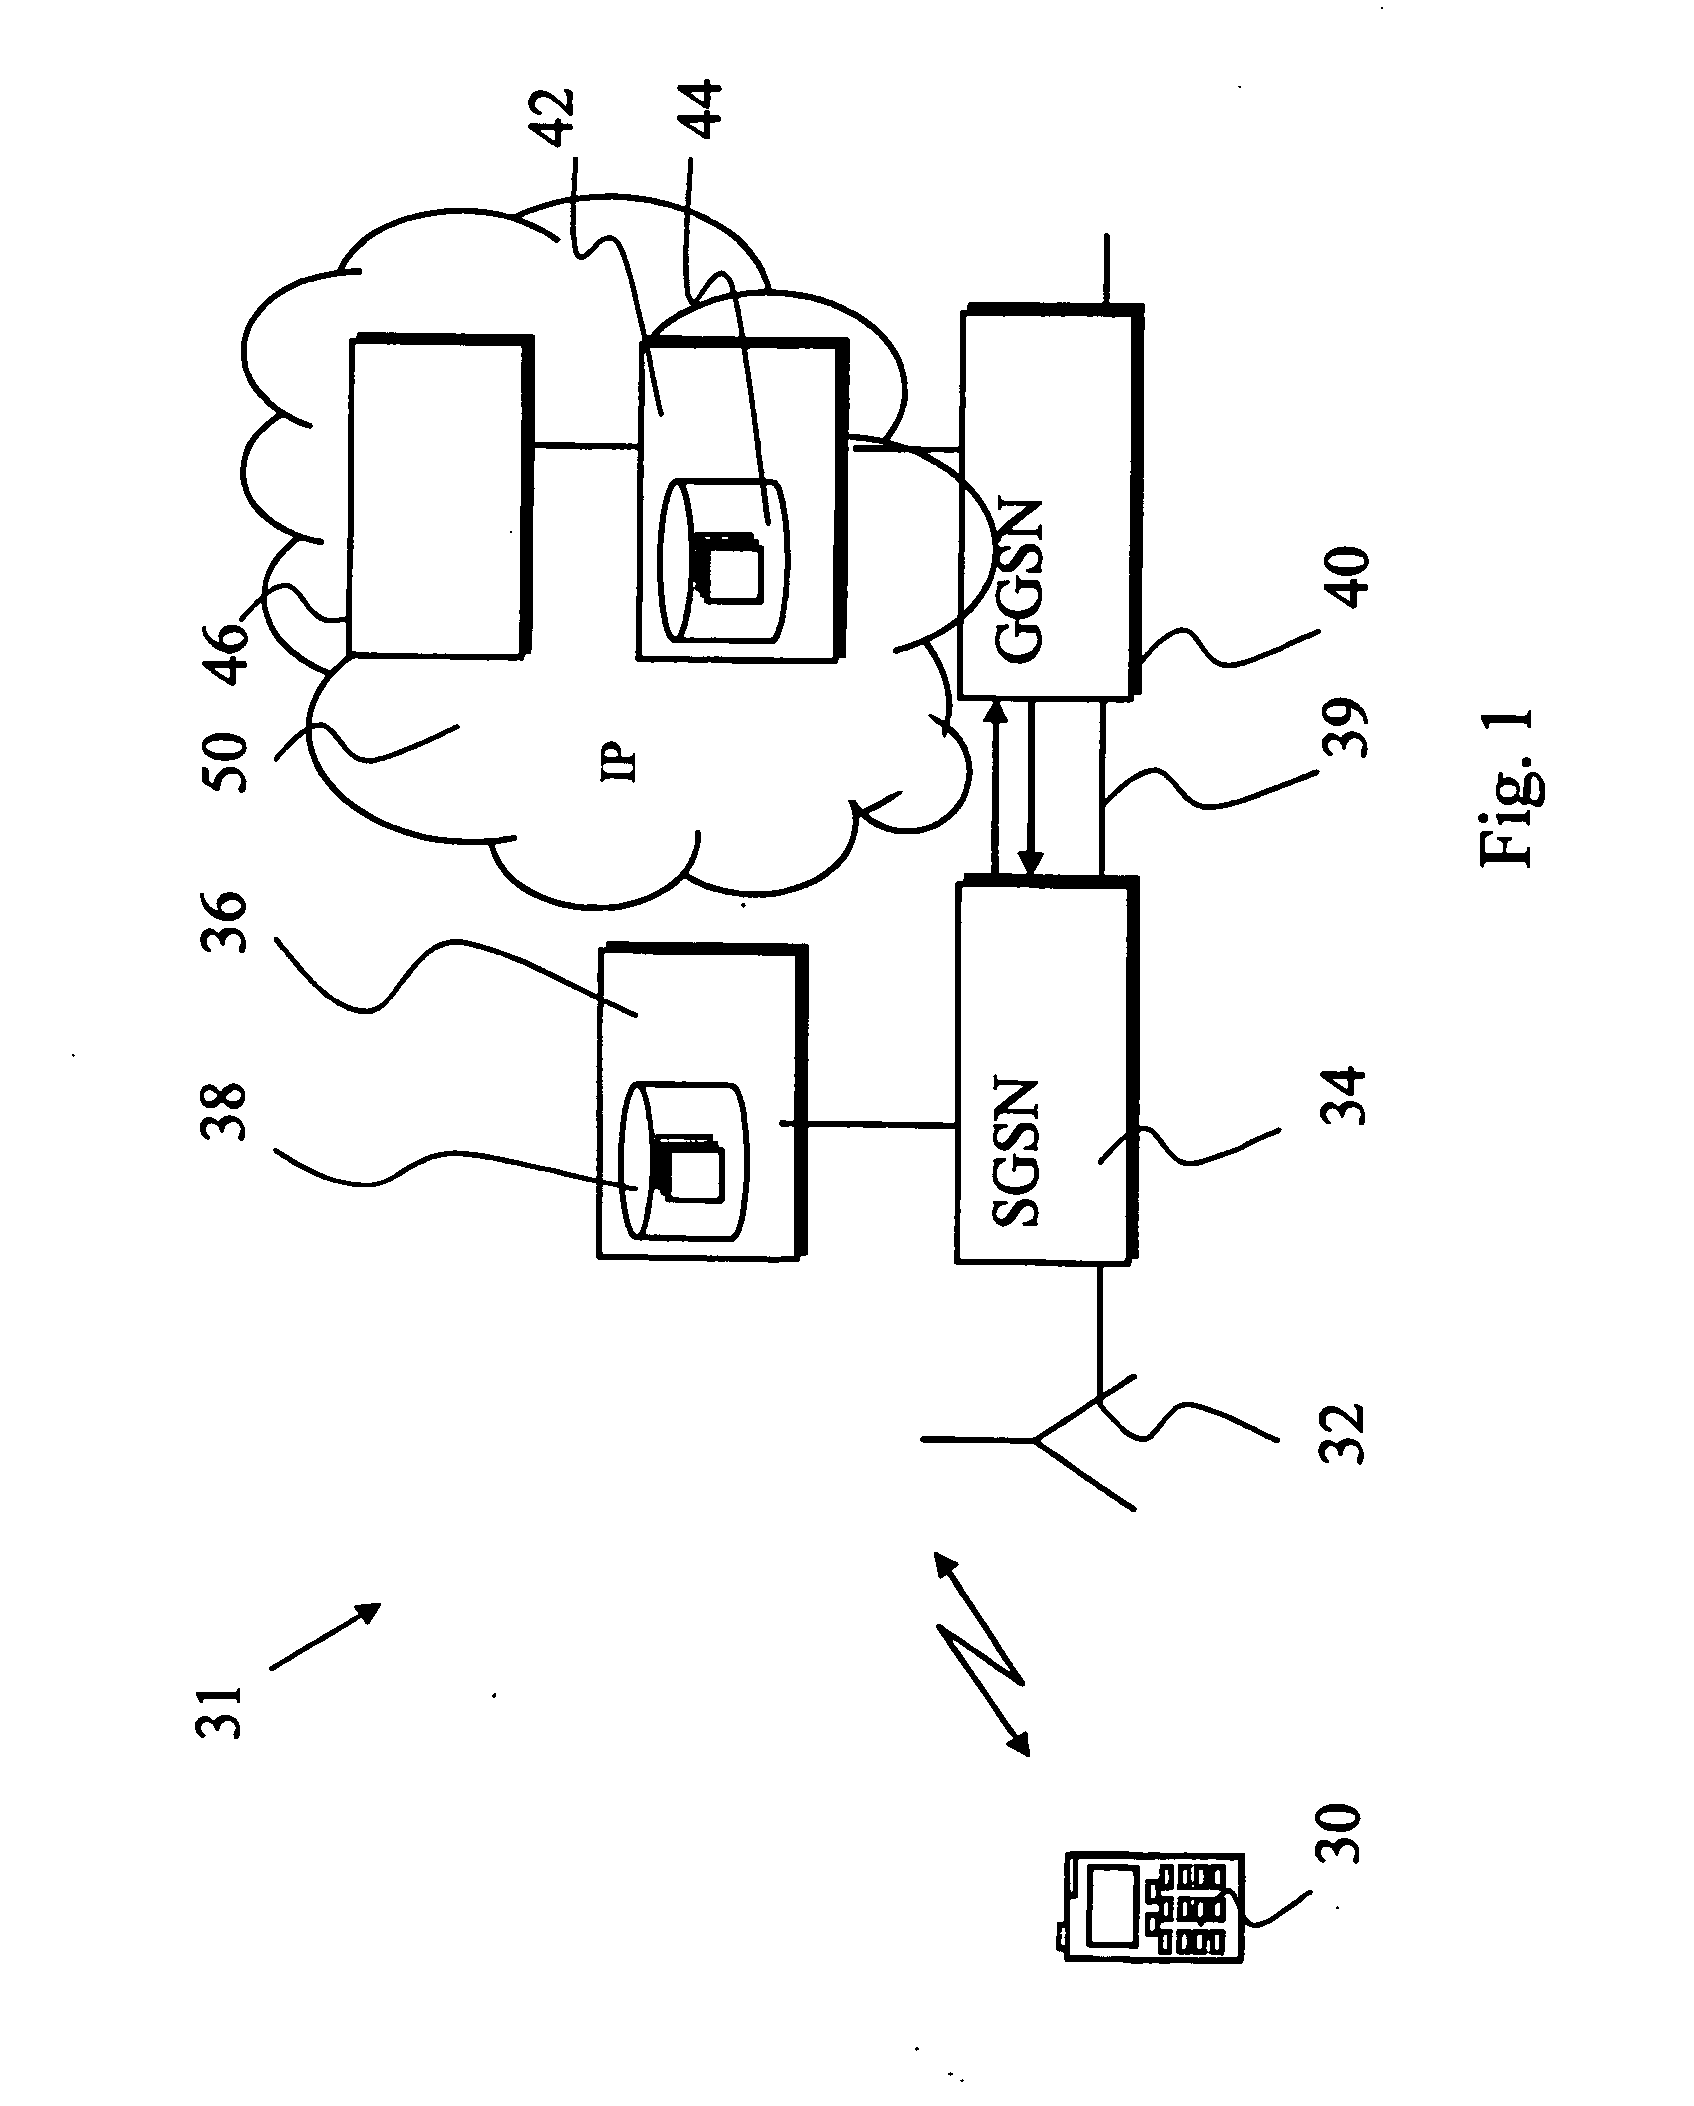 Session control in a communication system